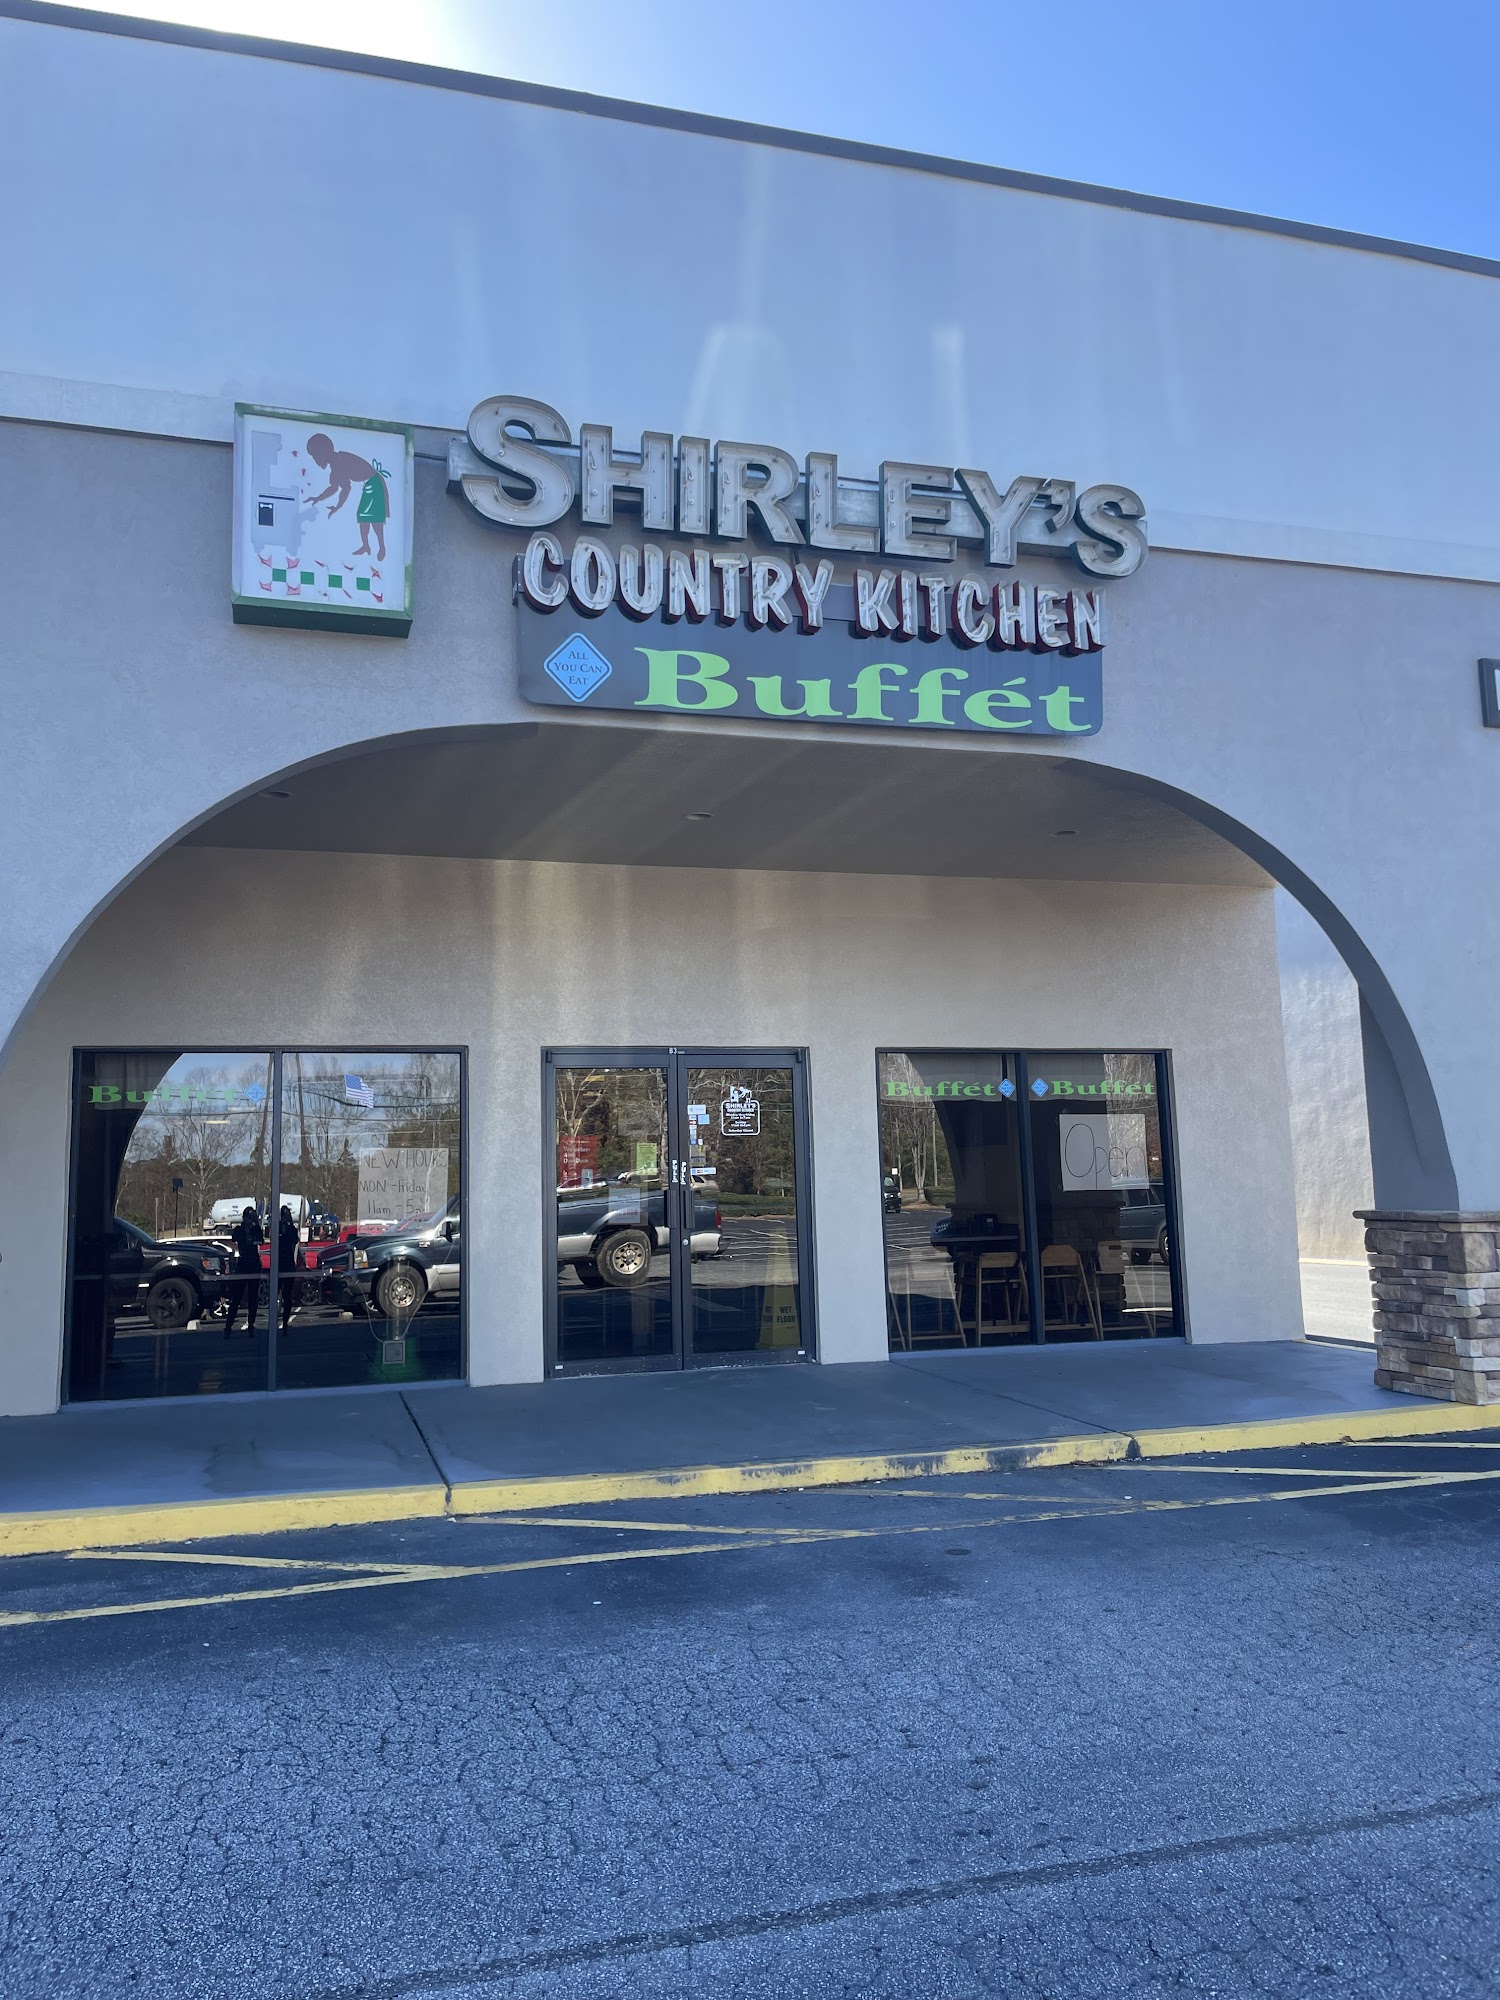 Shirley's Country Kitchen